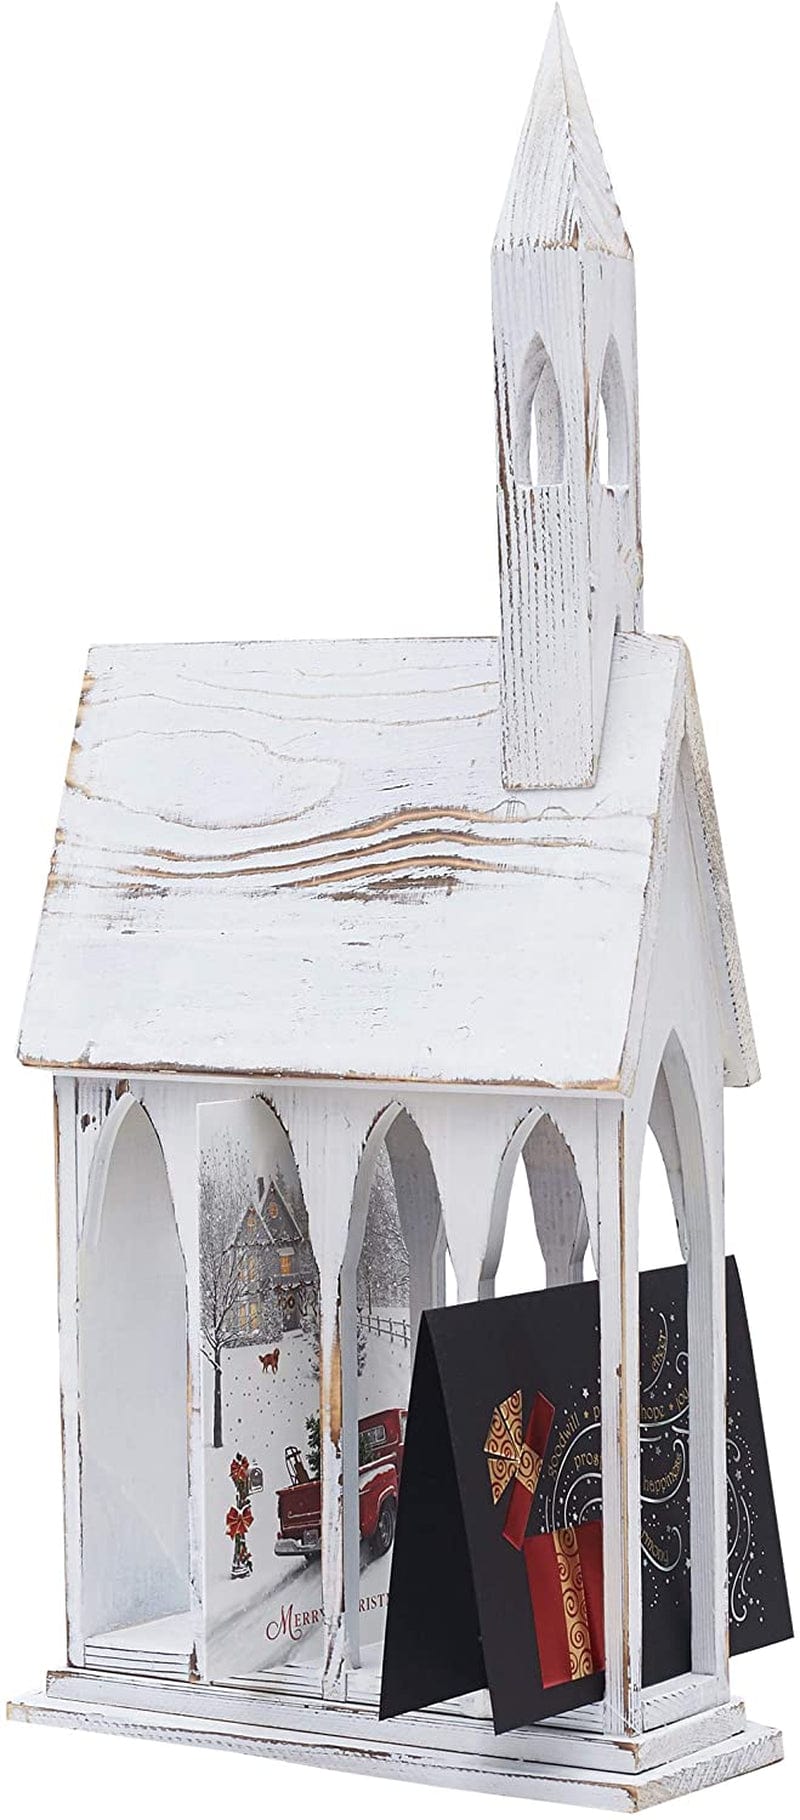 GALLERIE II Church Card Mail Holder Rustic Wood Distressed Table Home Decor Decoration for Christmas Xmas Holiday Everyday Cream